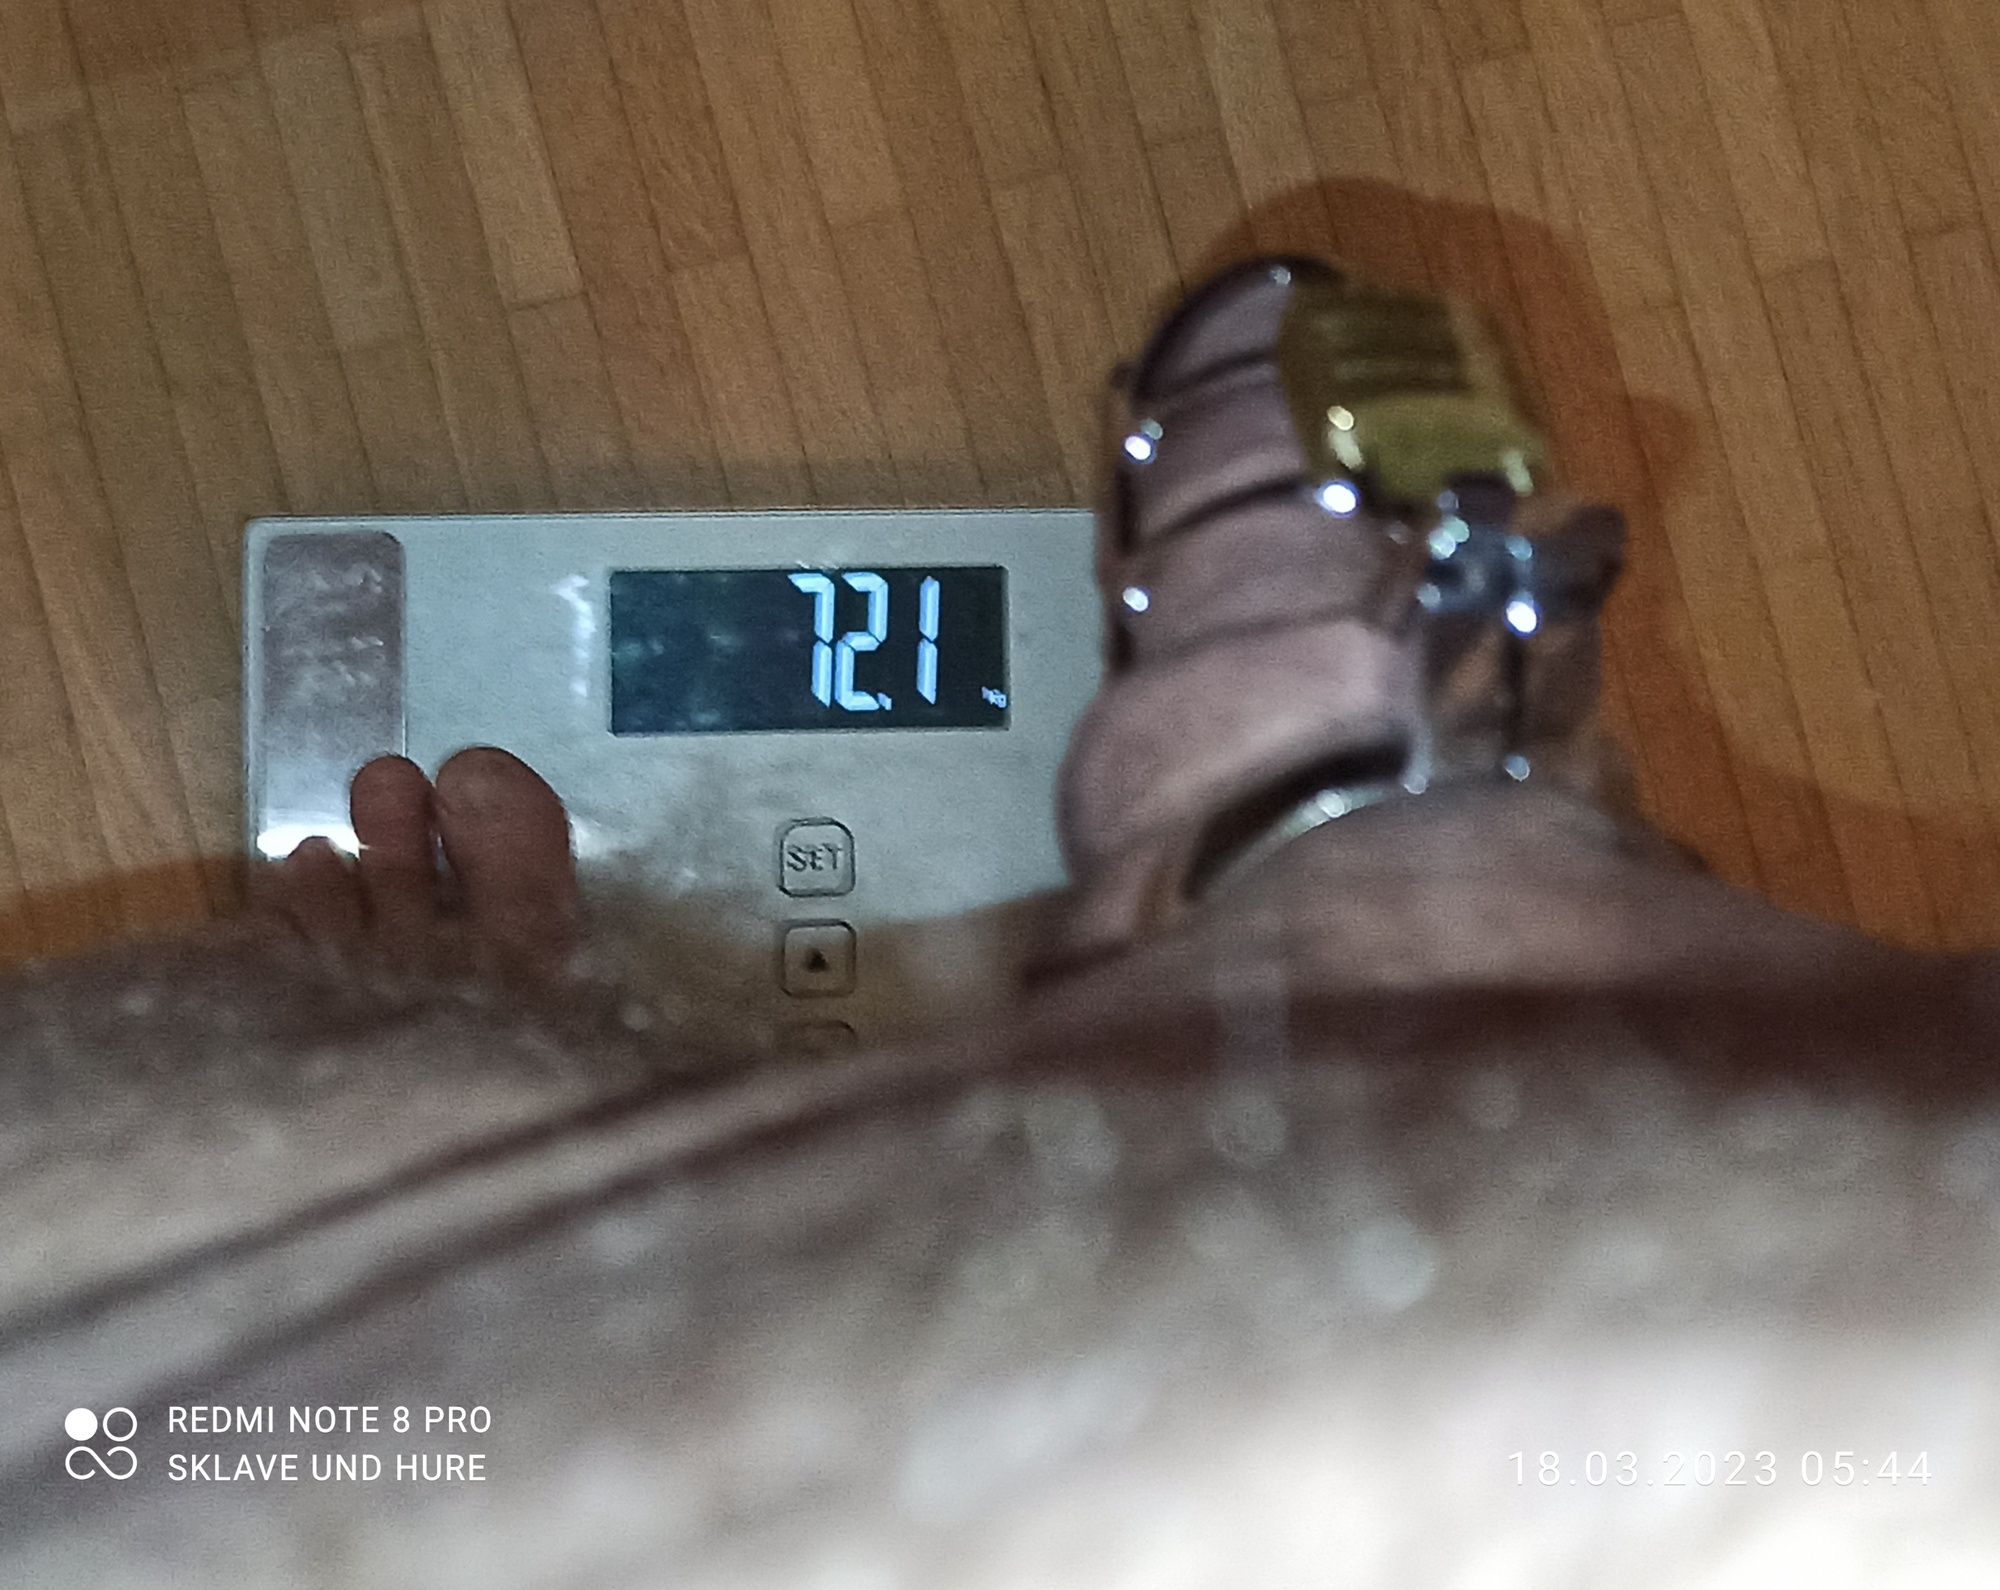 mandatory weighing and cagecheck of 18.03.23 #17